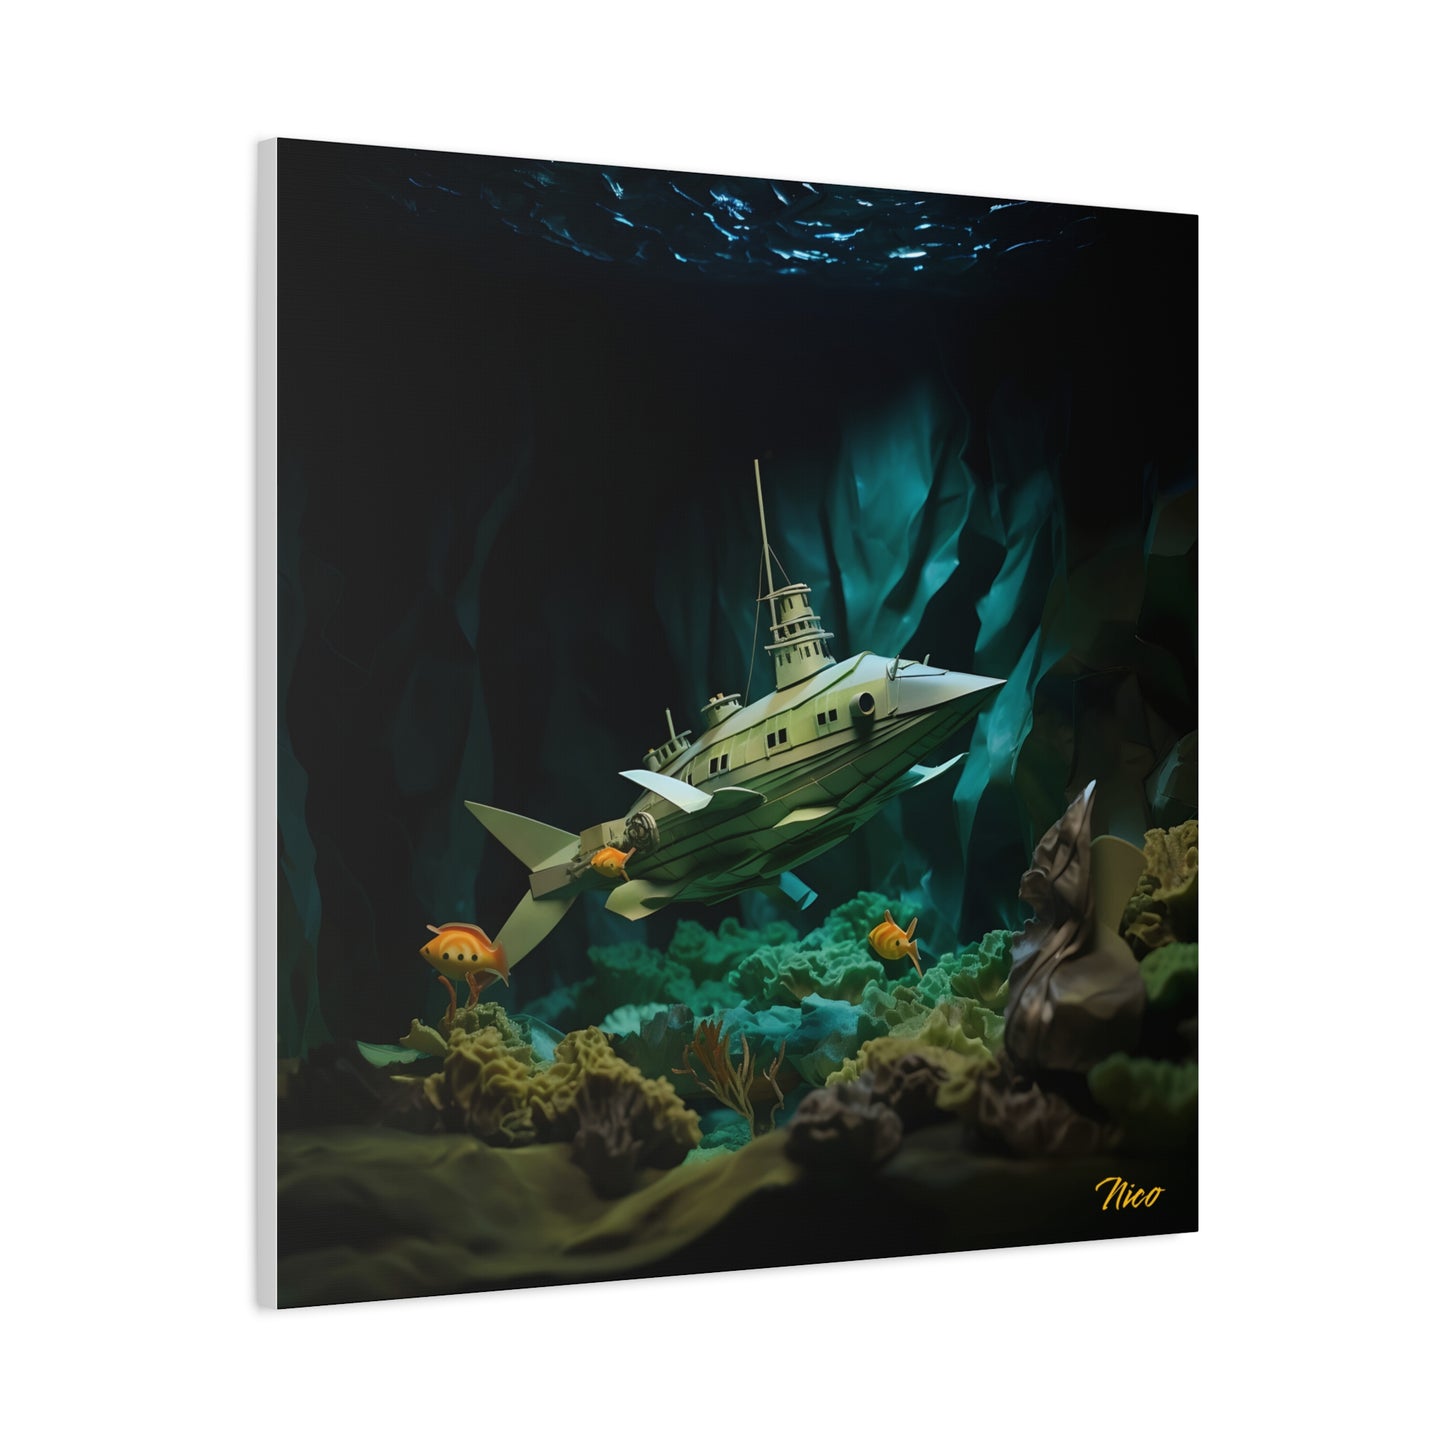 20,000 Leagues Under The Sea Series Print #8 - Streched Matte Canvas Print, 1.25" Thick